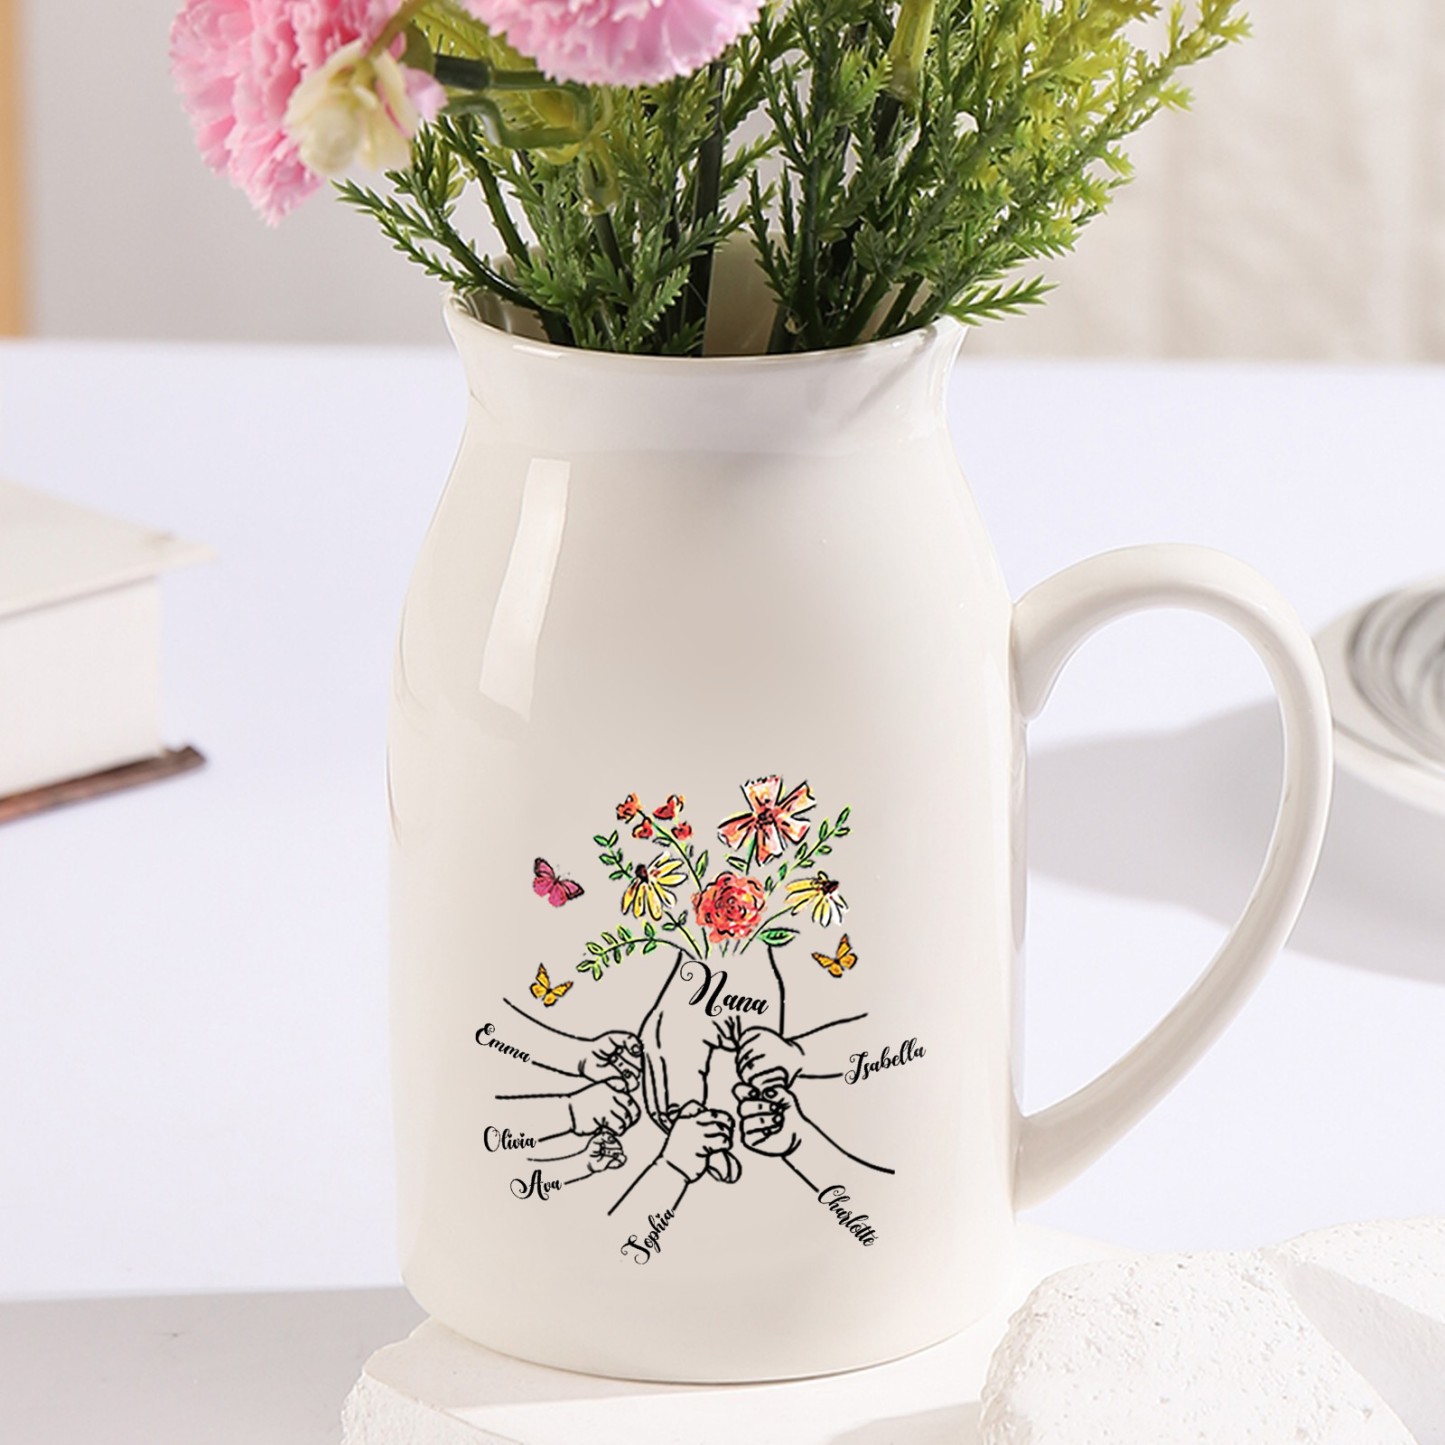 6 Names - Personalized Beautiful Flower Hand Butterfly Style Ceramic Vase with Customizable Names As a Mother's Day Gift For Grandma/Mom